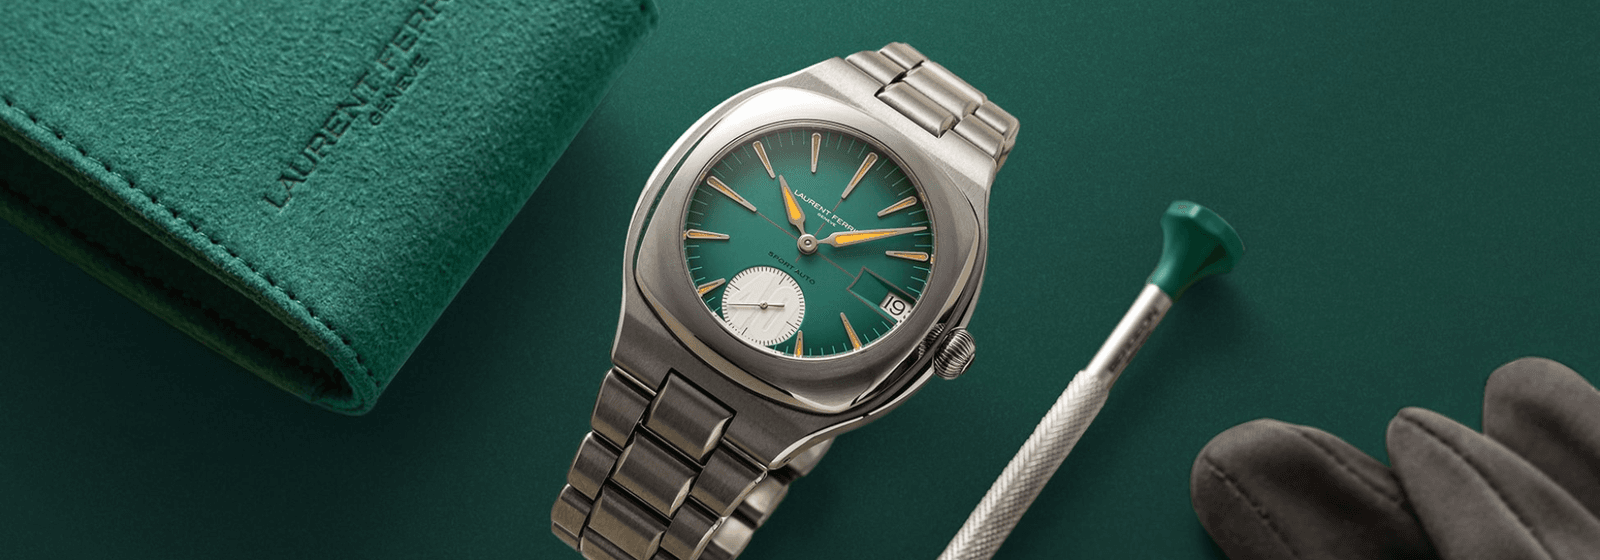 Laurent Ferrier Upgrades Its Série Atelier Collection With The Lunch Of Sport Auto 40 With A Green Dial